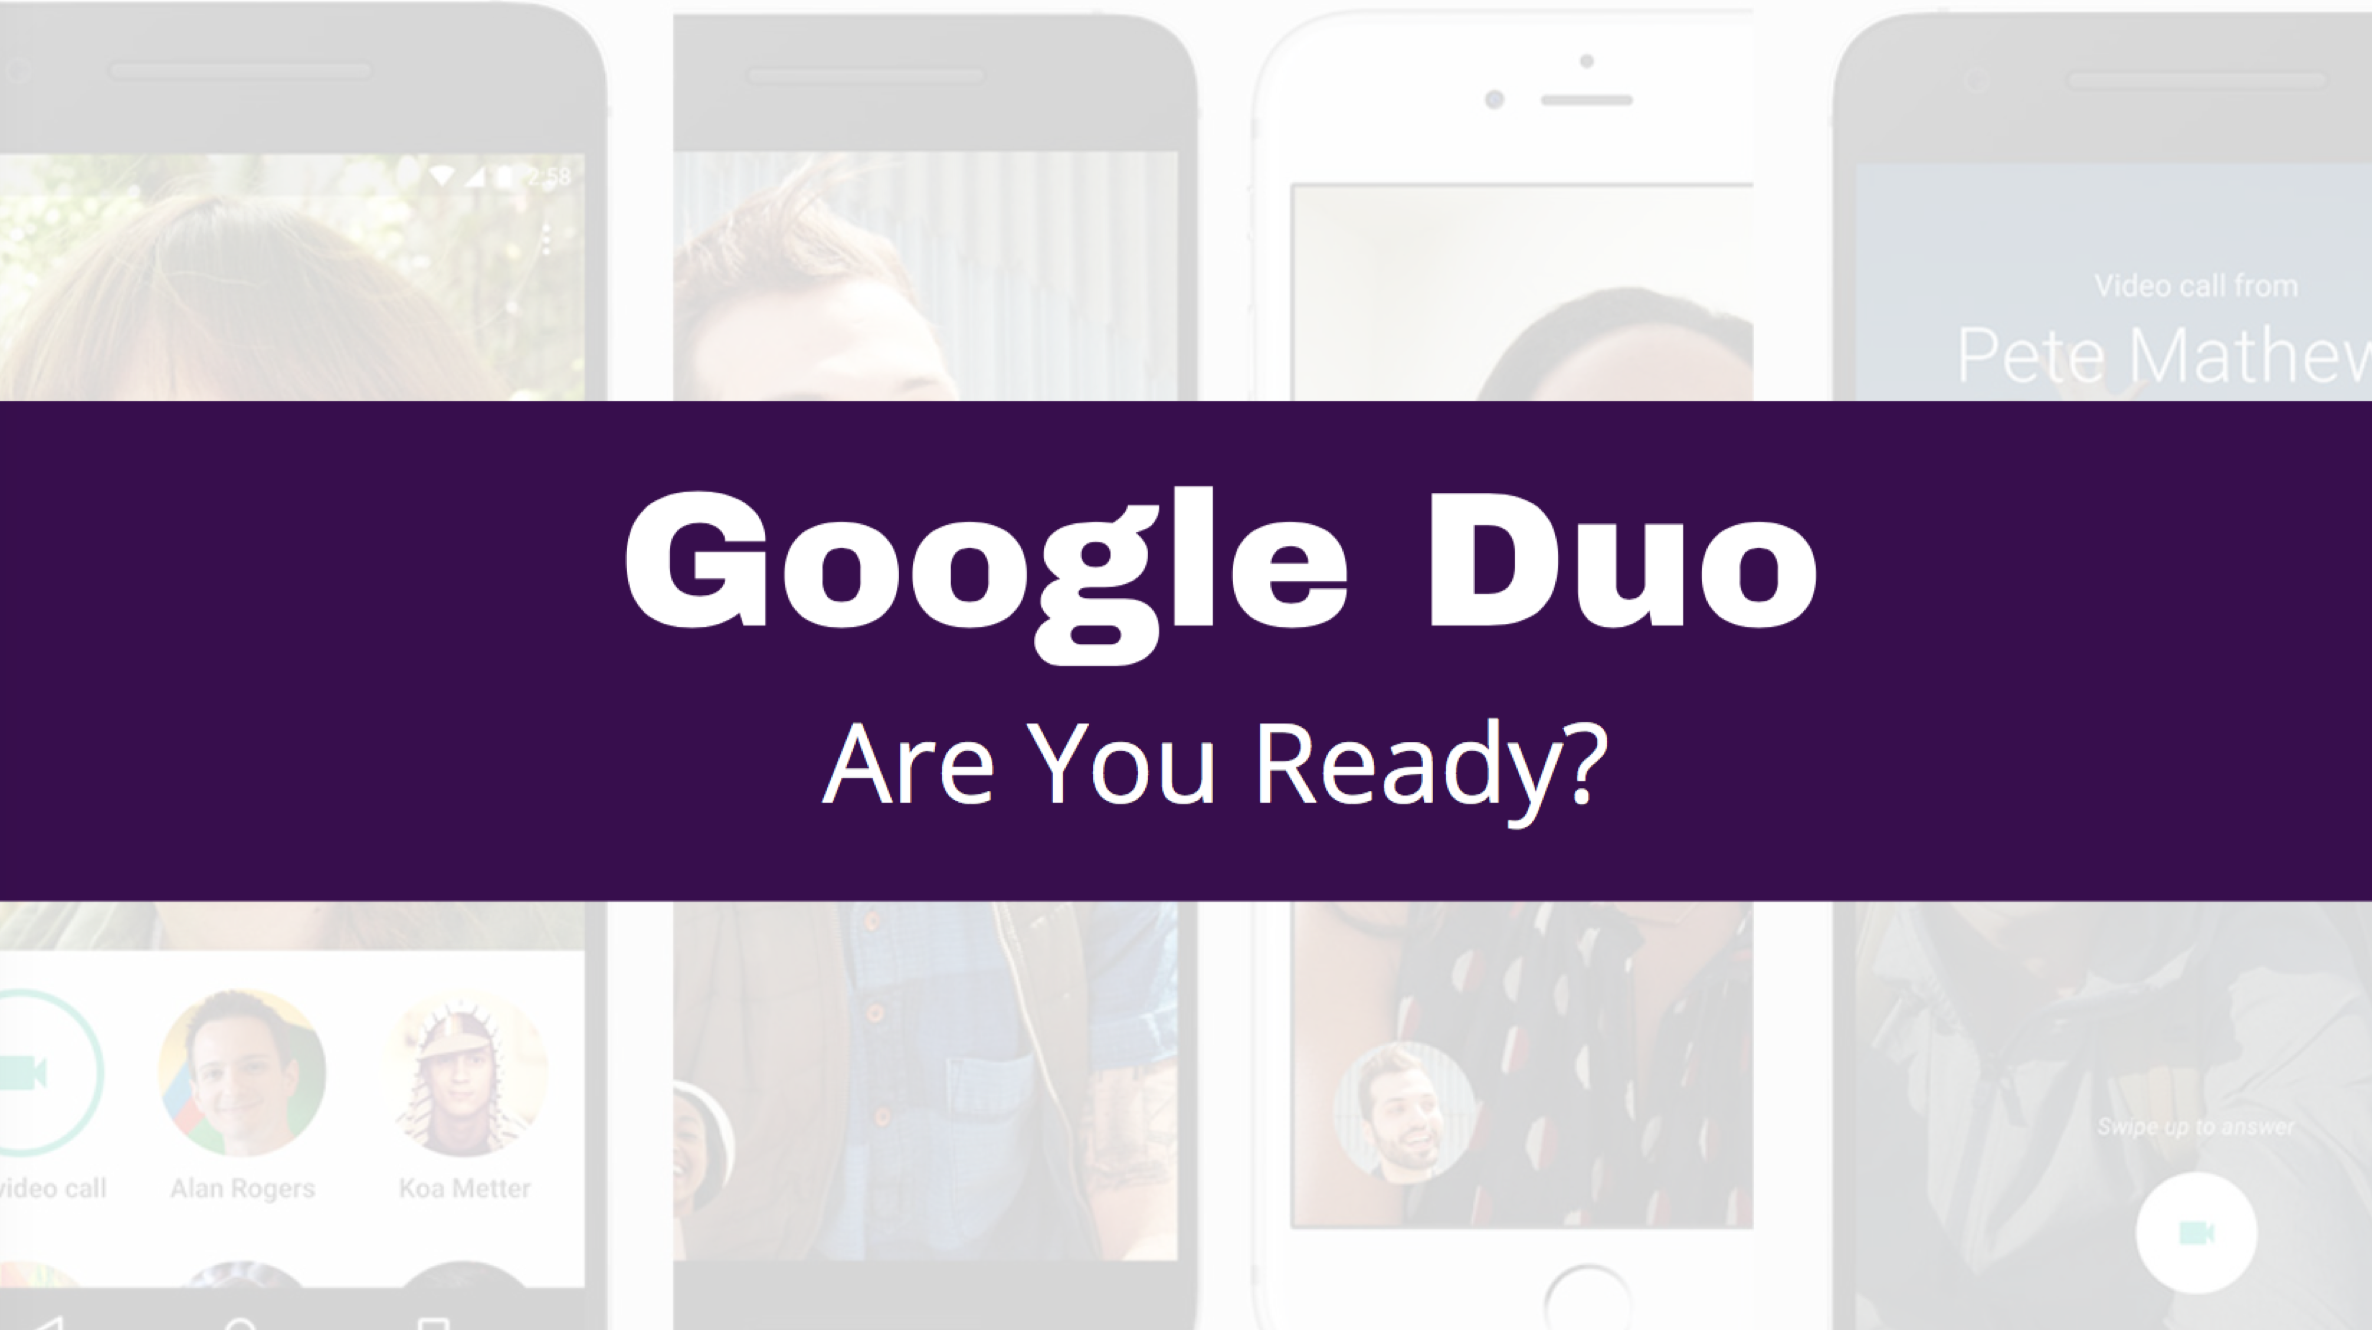 Are You Ready for Google Duo?